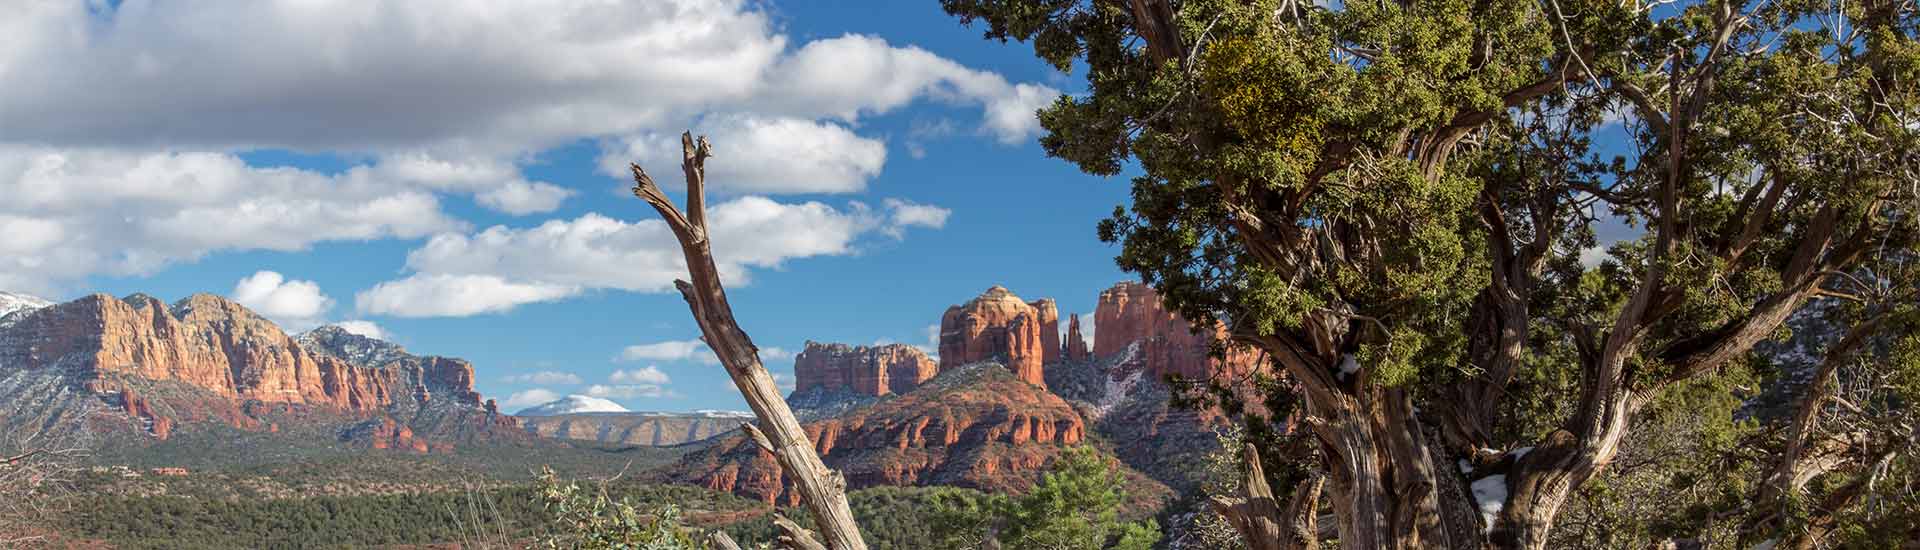 View of Sedona Cathedral Rock through mesquite tree from Upper Red Rock Loop road